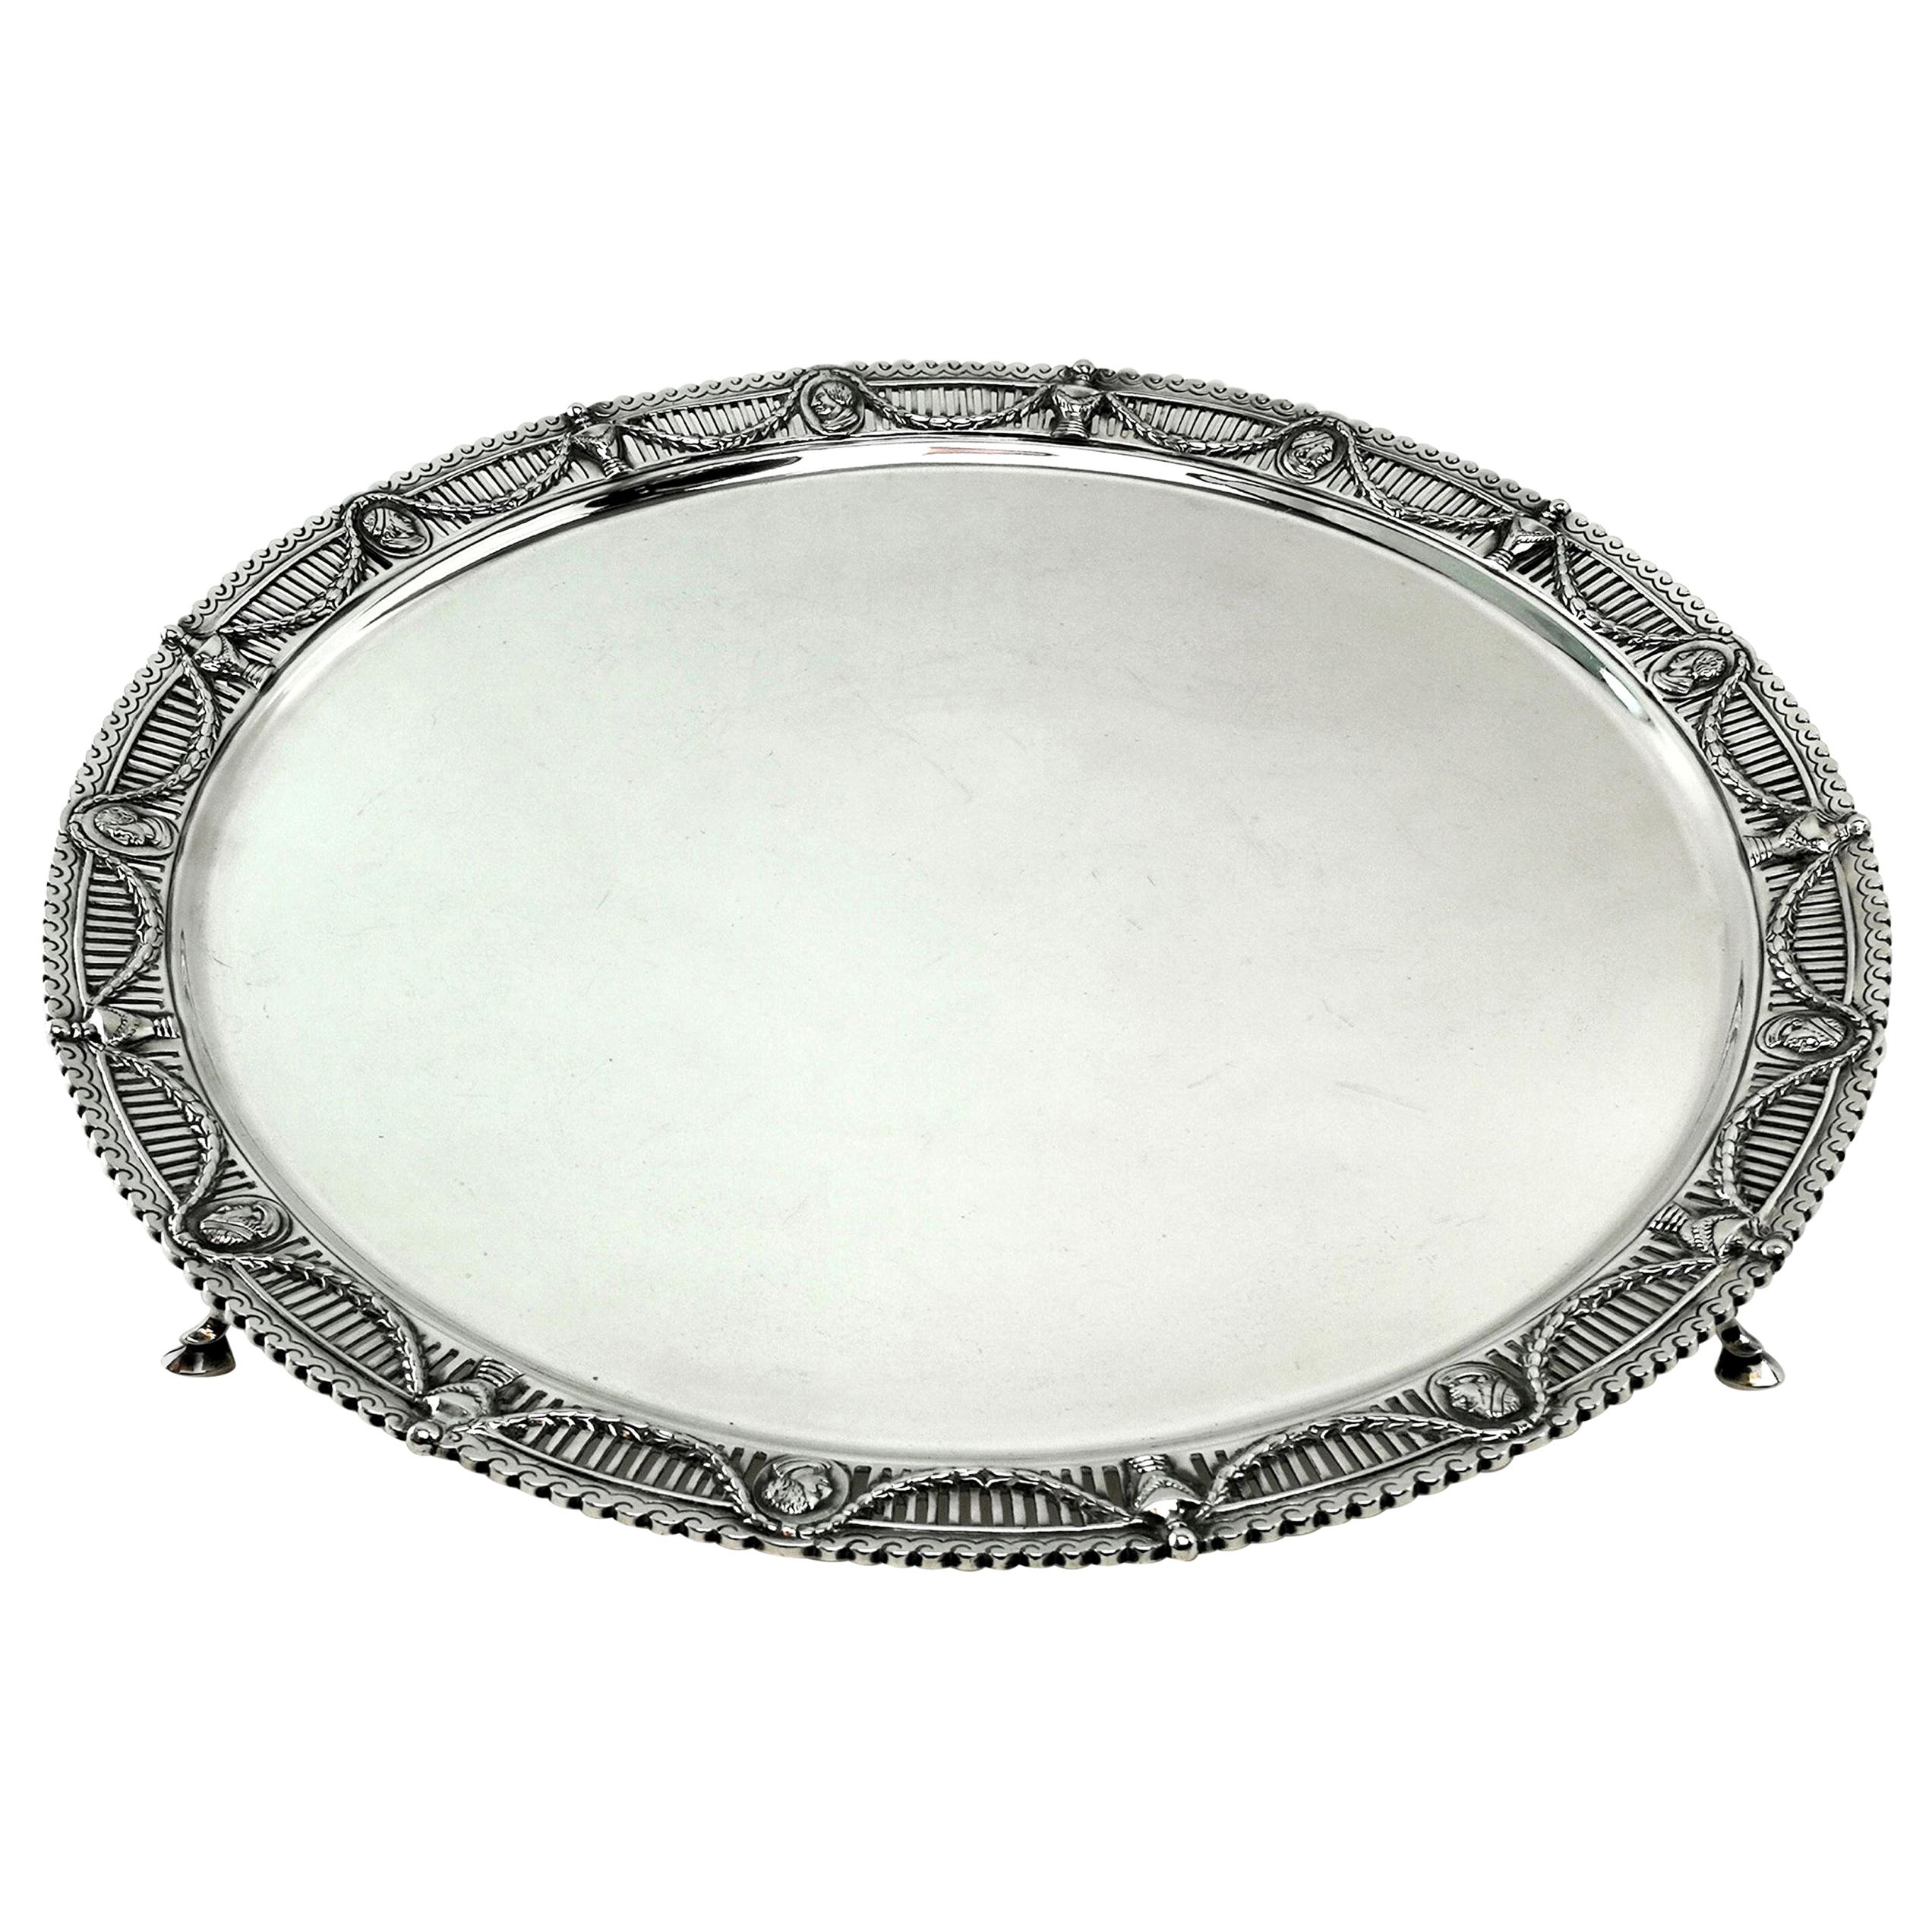 Victorian Antique Sterling Silver Salver Tray Platter, 1897